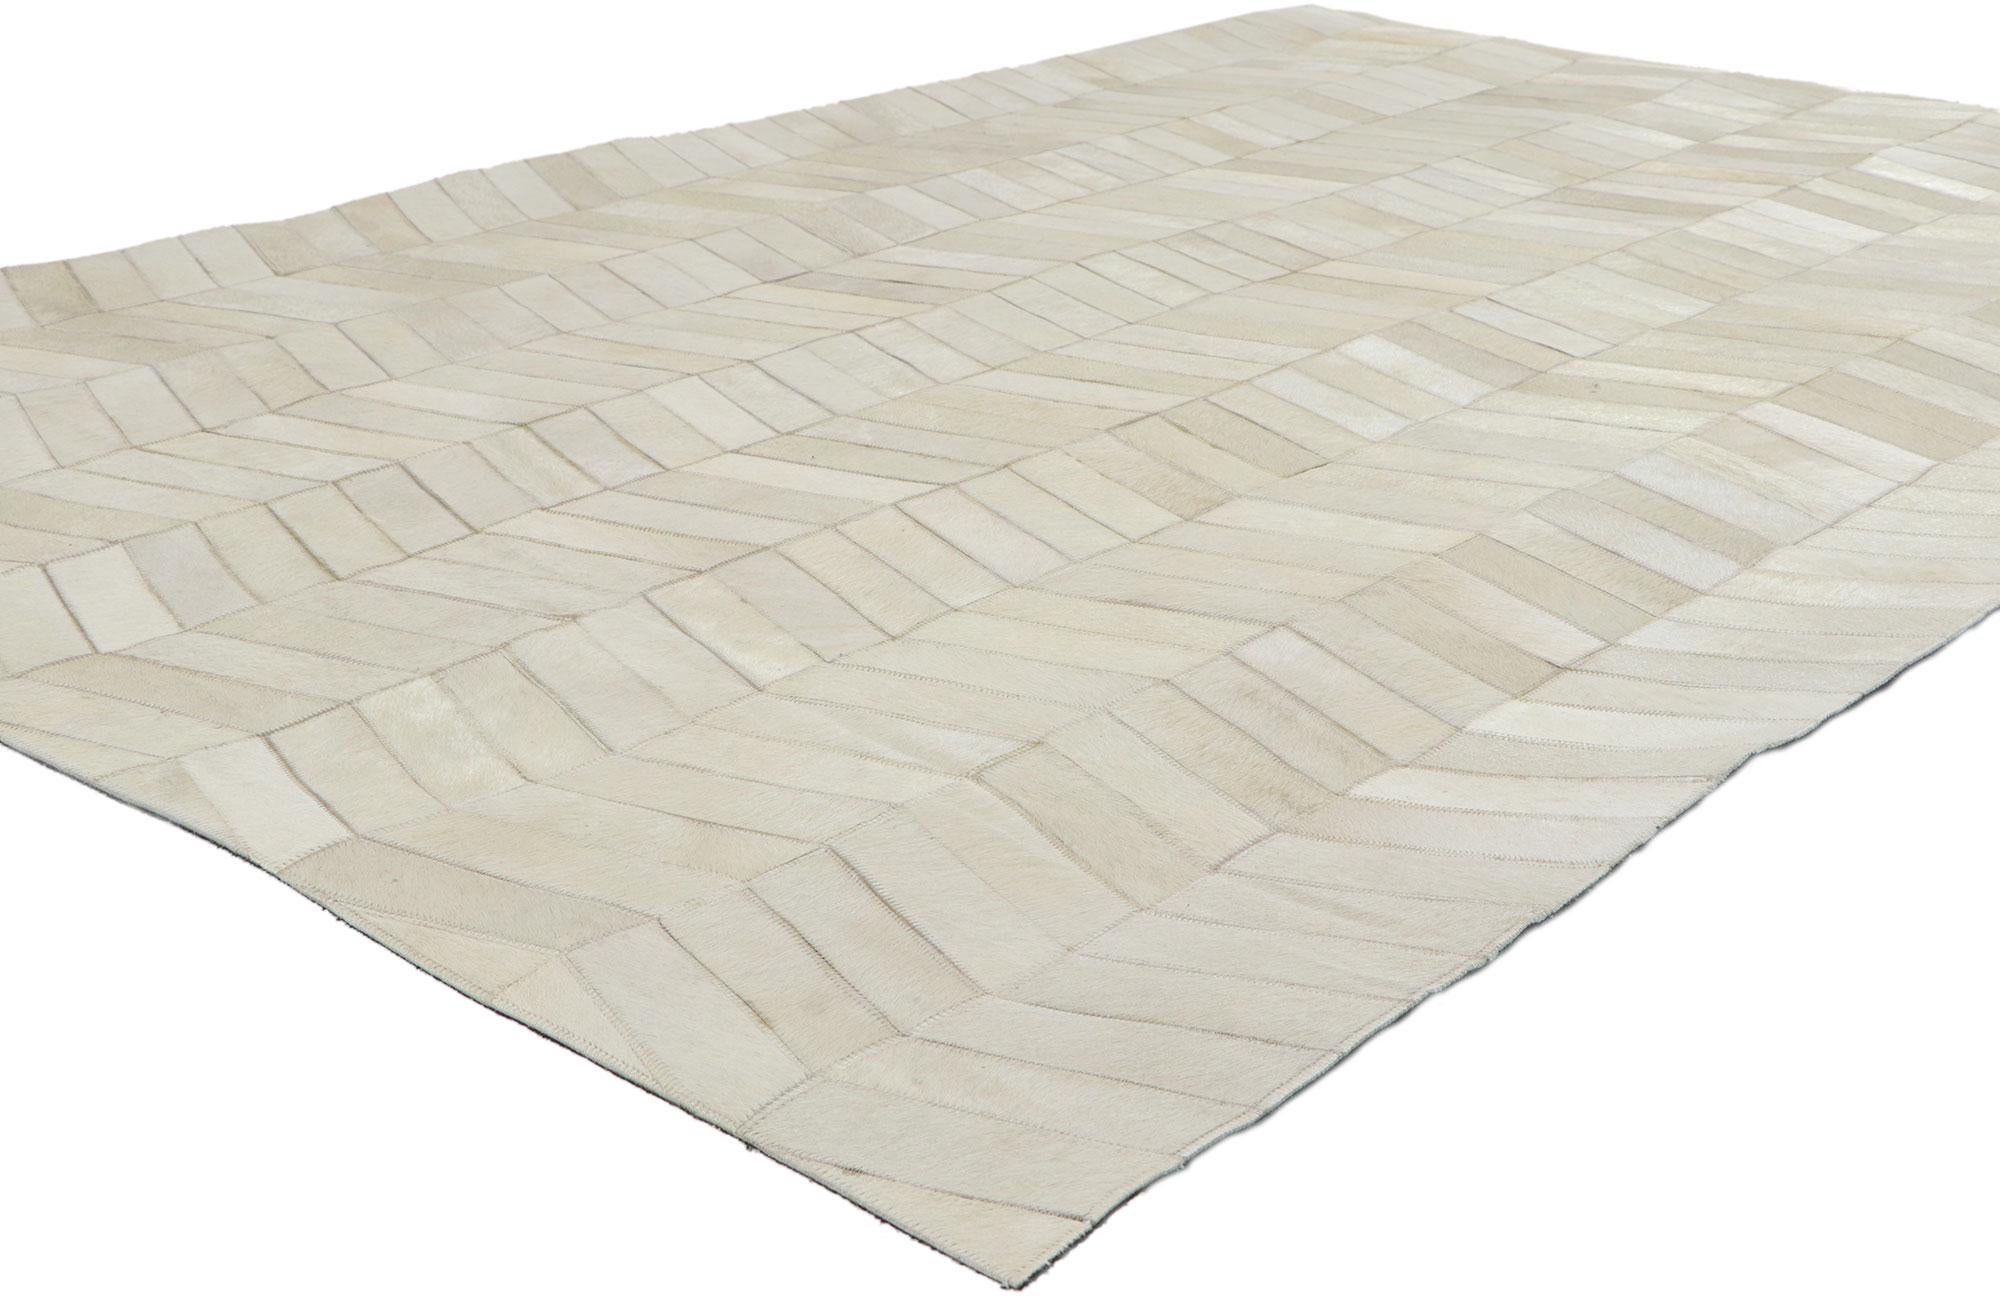 30907 Contemporary Patchwork Cowhide Rug with Modern Style, 05'00 x 07'05. Call the wild indoors and bring a sense of adventure home with this handcrafted cowhide rug. Showcasing a modern design, incredible detail and texture, this leather cowhide